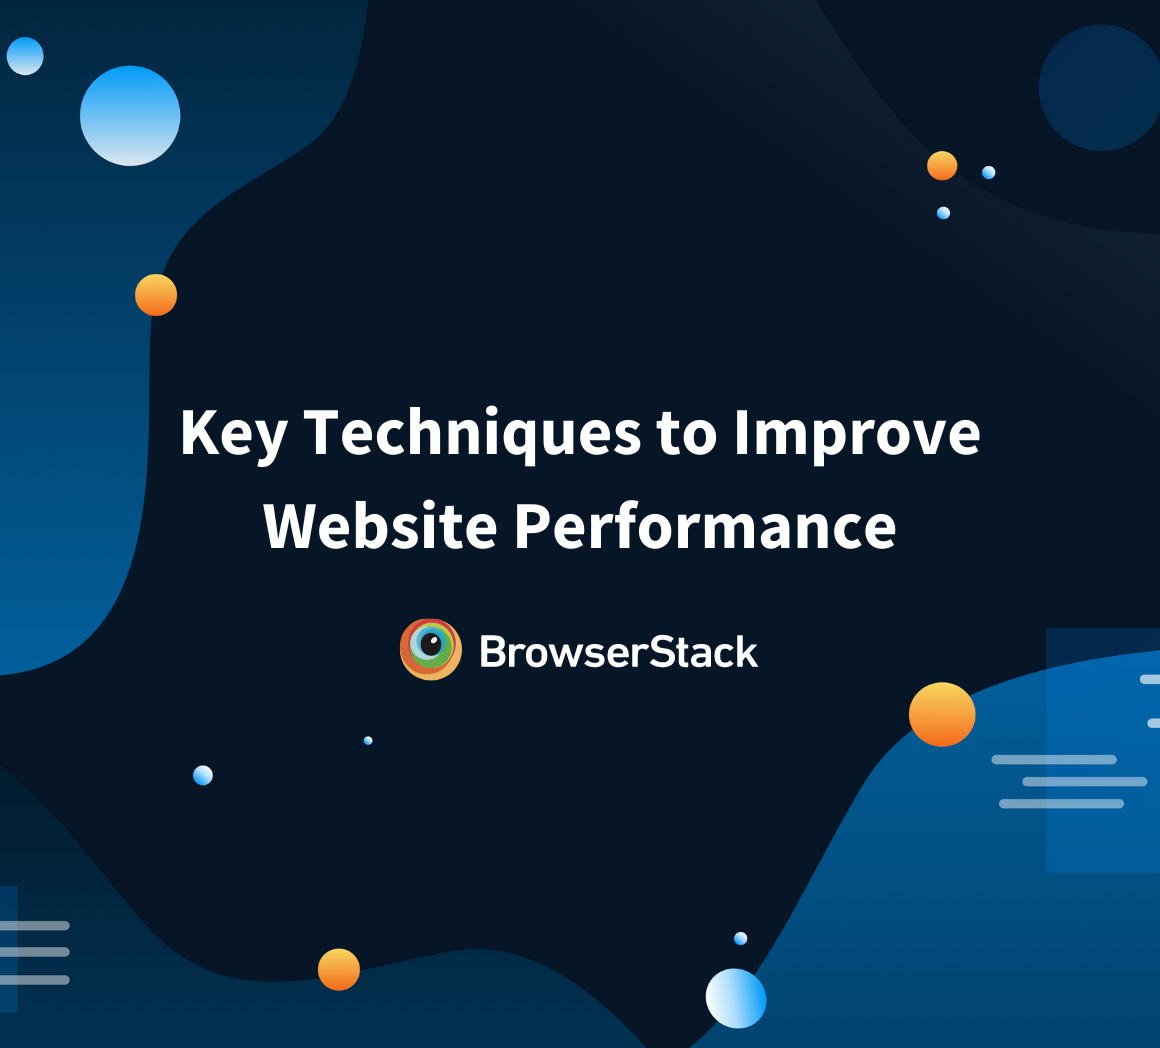 How to improve website performance